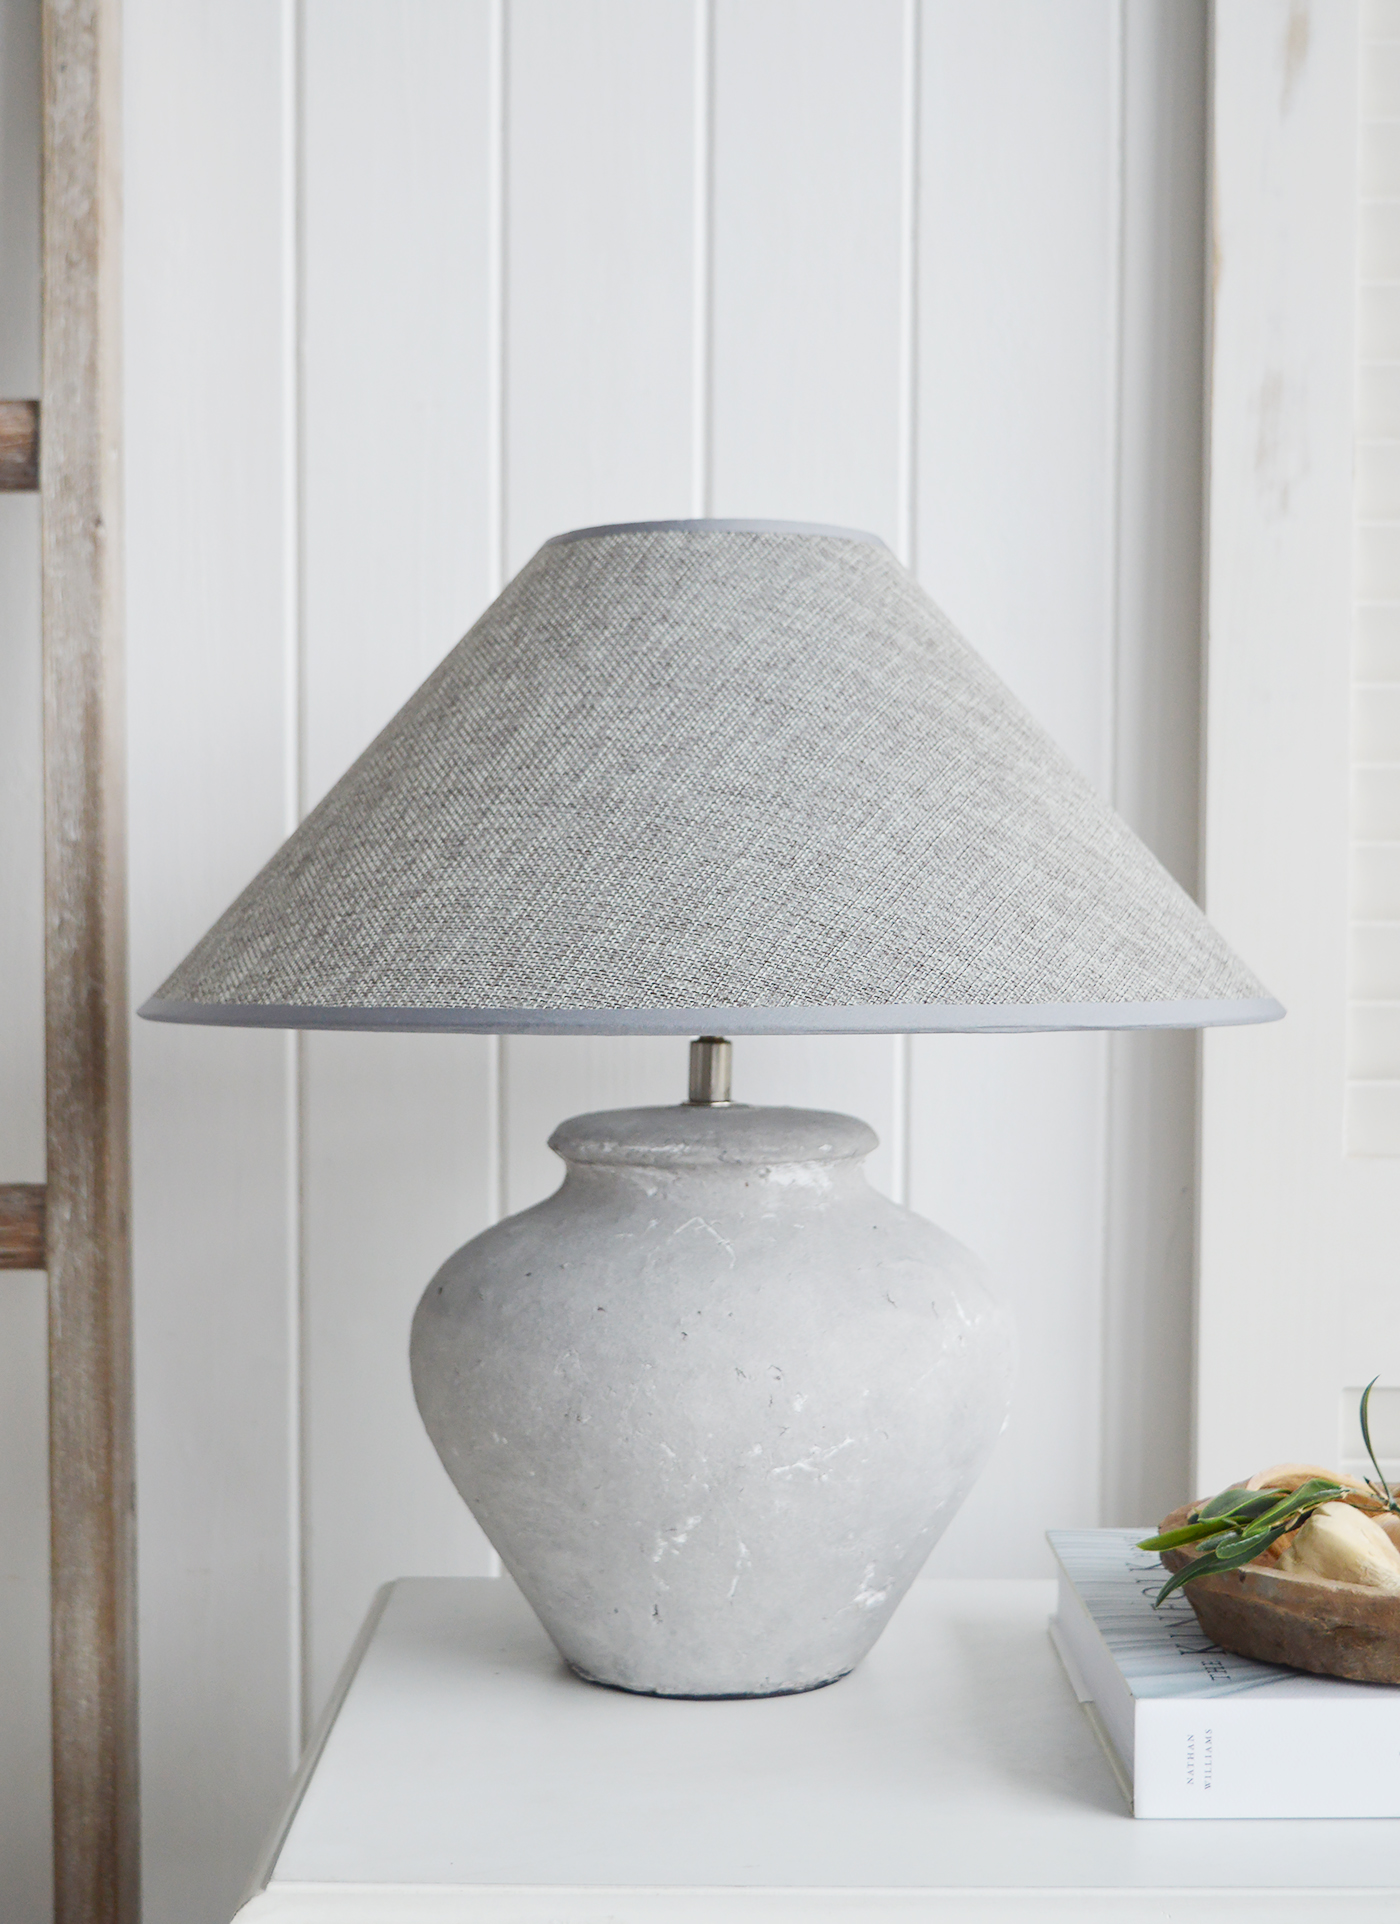 A grey  stone lamp from The White Lighthouse Furniture. A lovely table lamp for bedside table or living room or bedroom furniture. New England style table lamps for country, coastal, citu and farmhouse styled homes